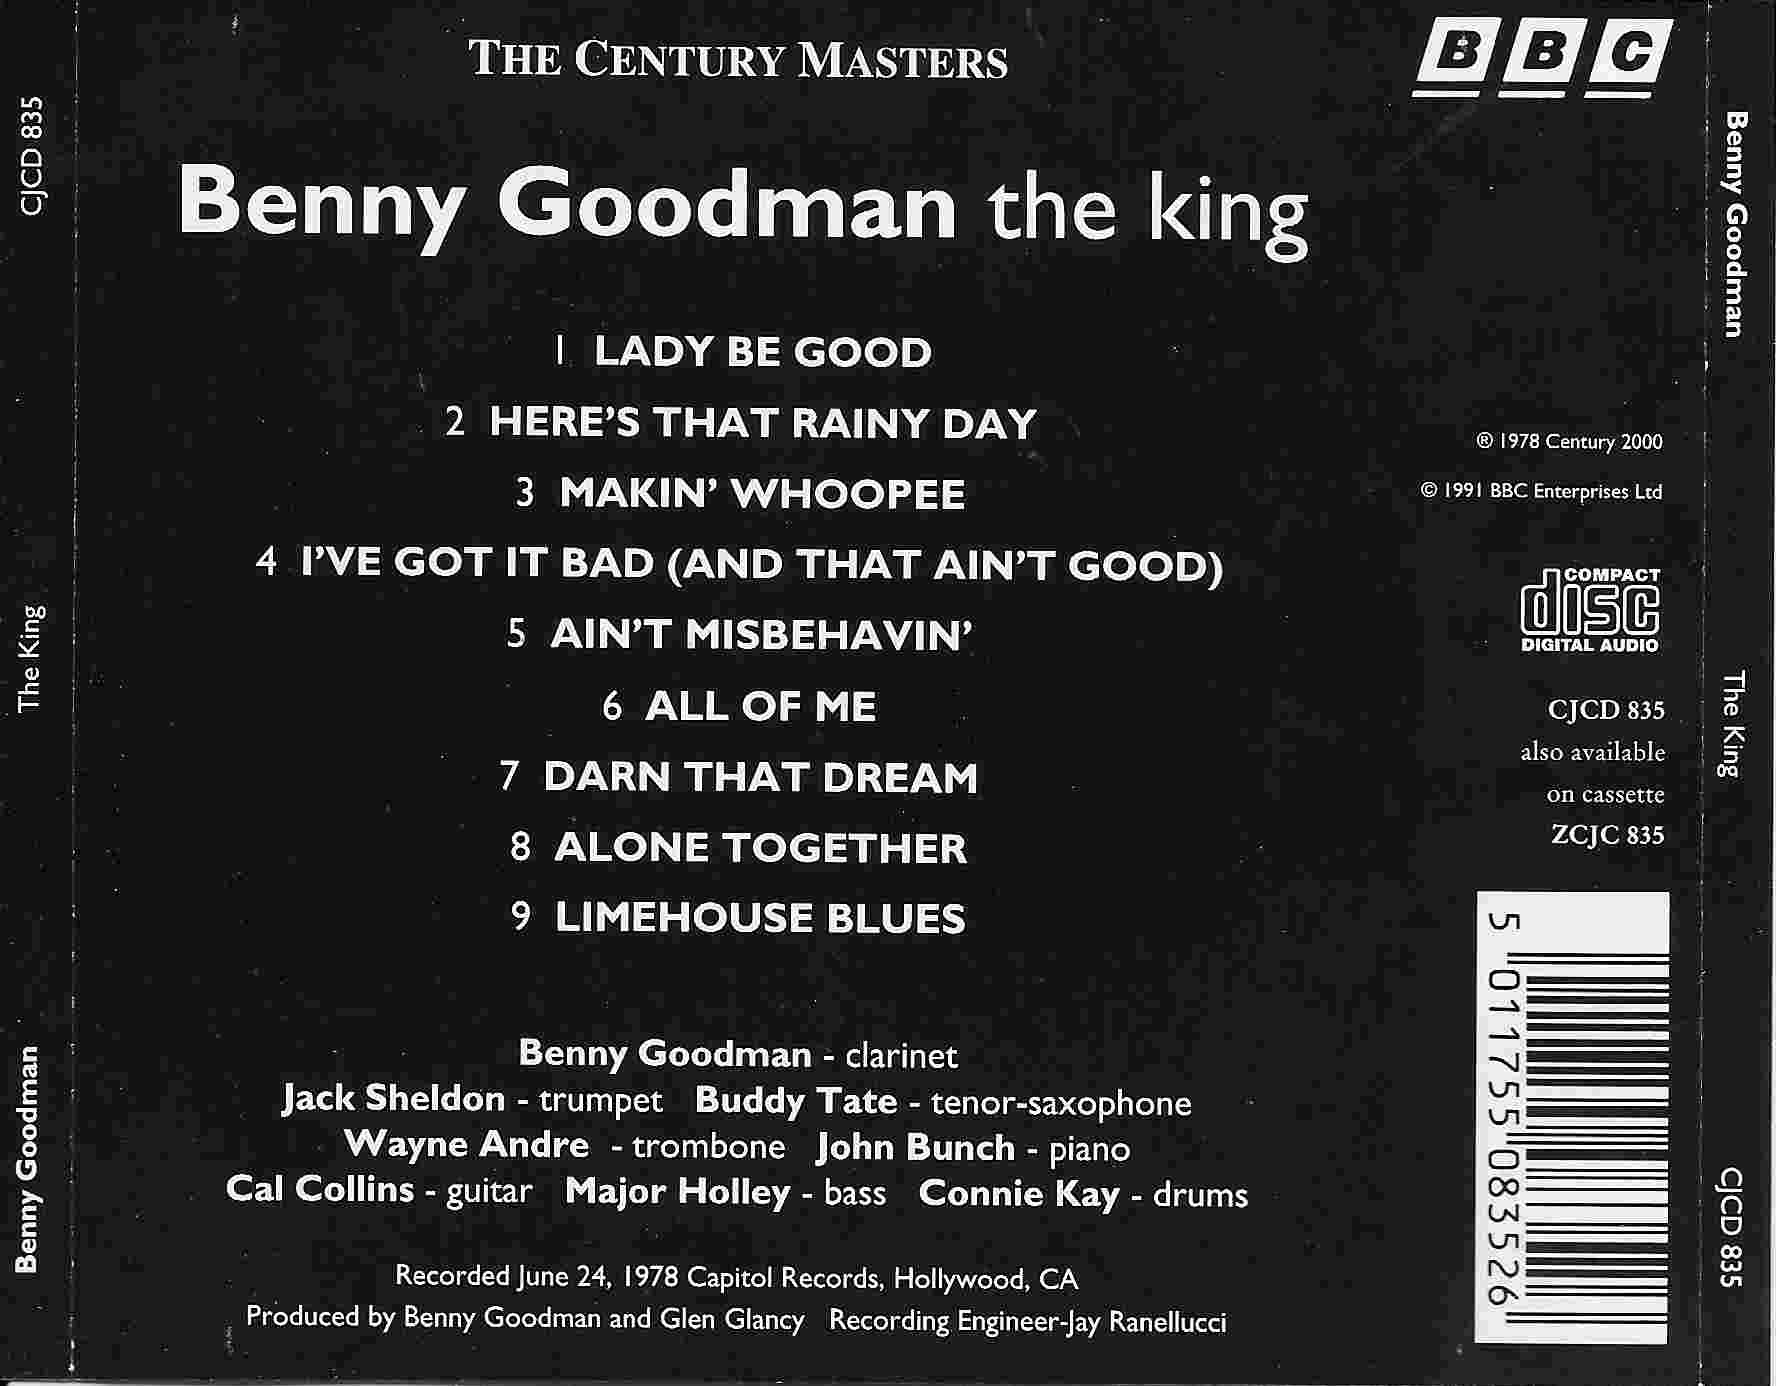 Back cover of CJCD 835